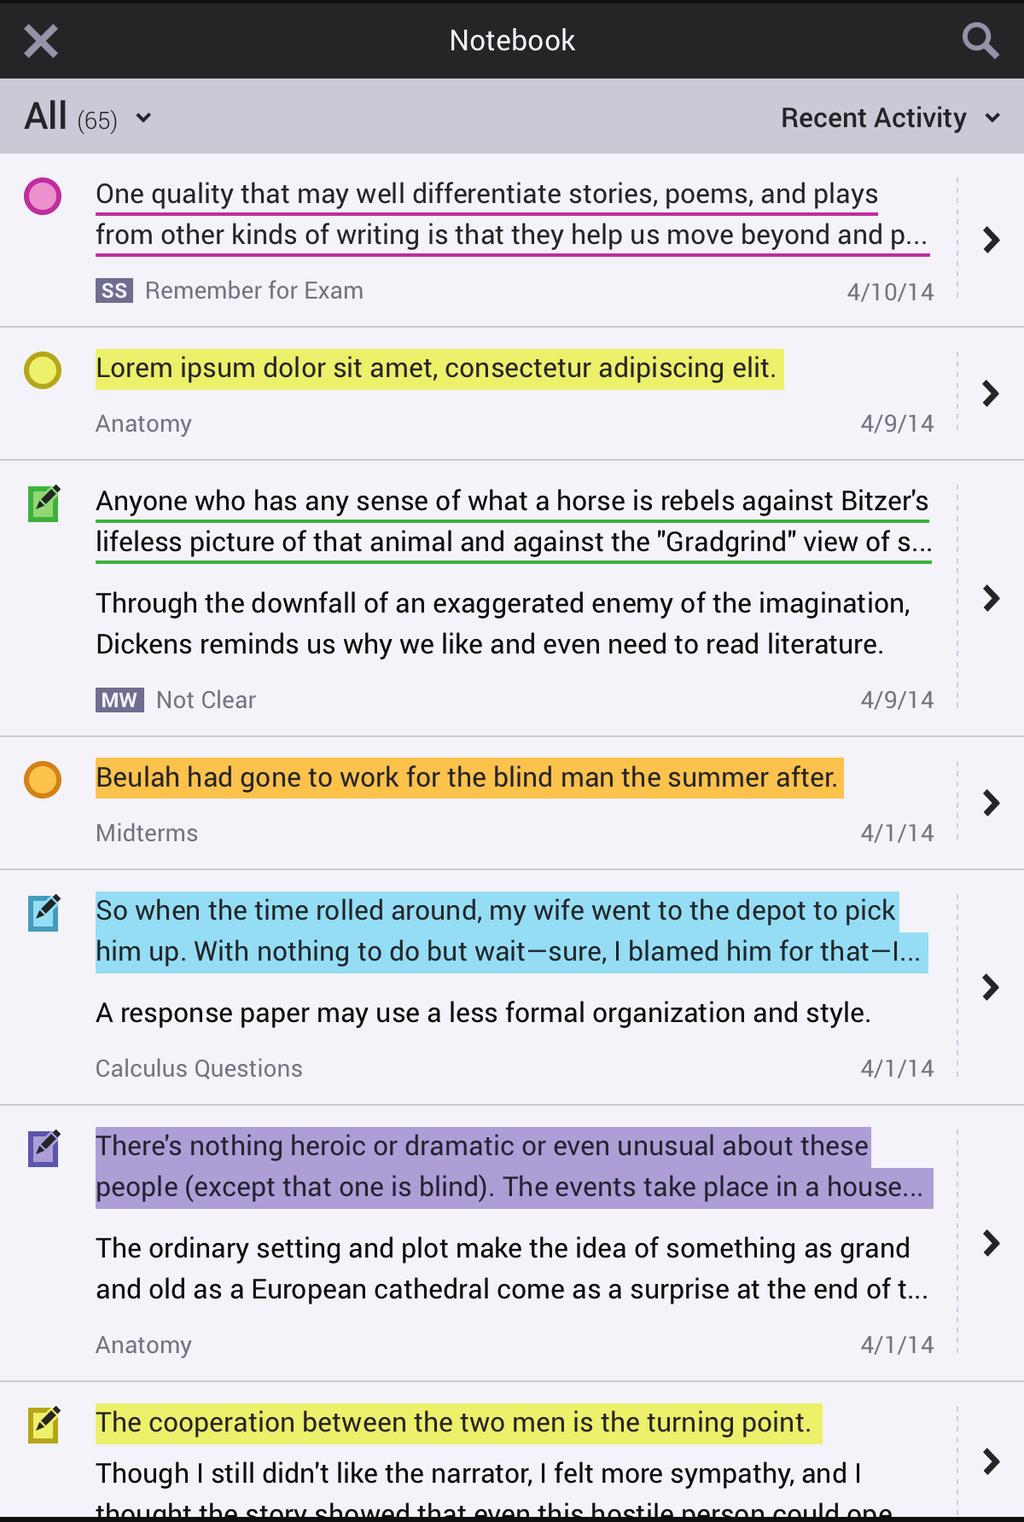 Notes and Highlights To create a highlight, tap and hold your finger on a word. Drag the end point to select all the text that you want to highlight.